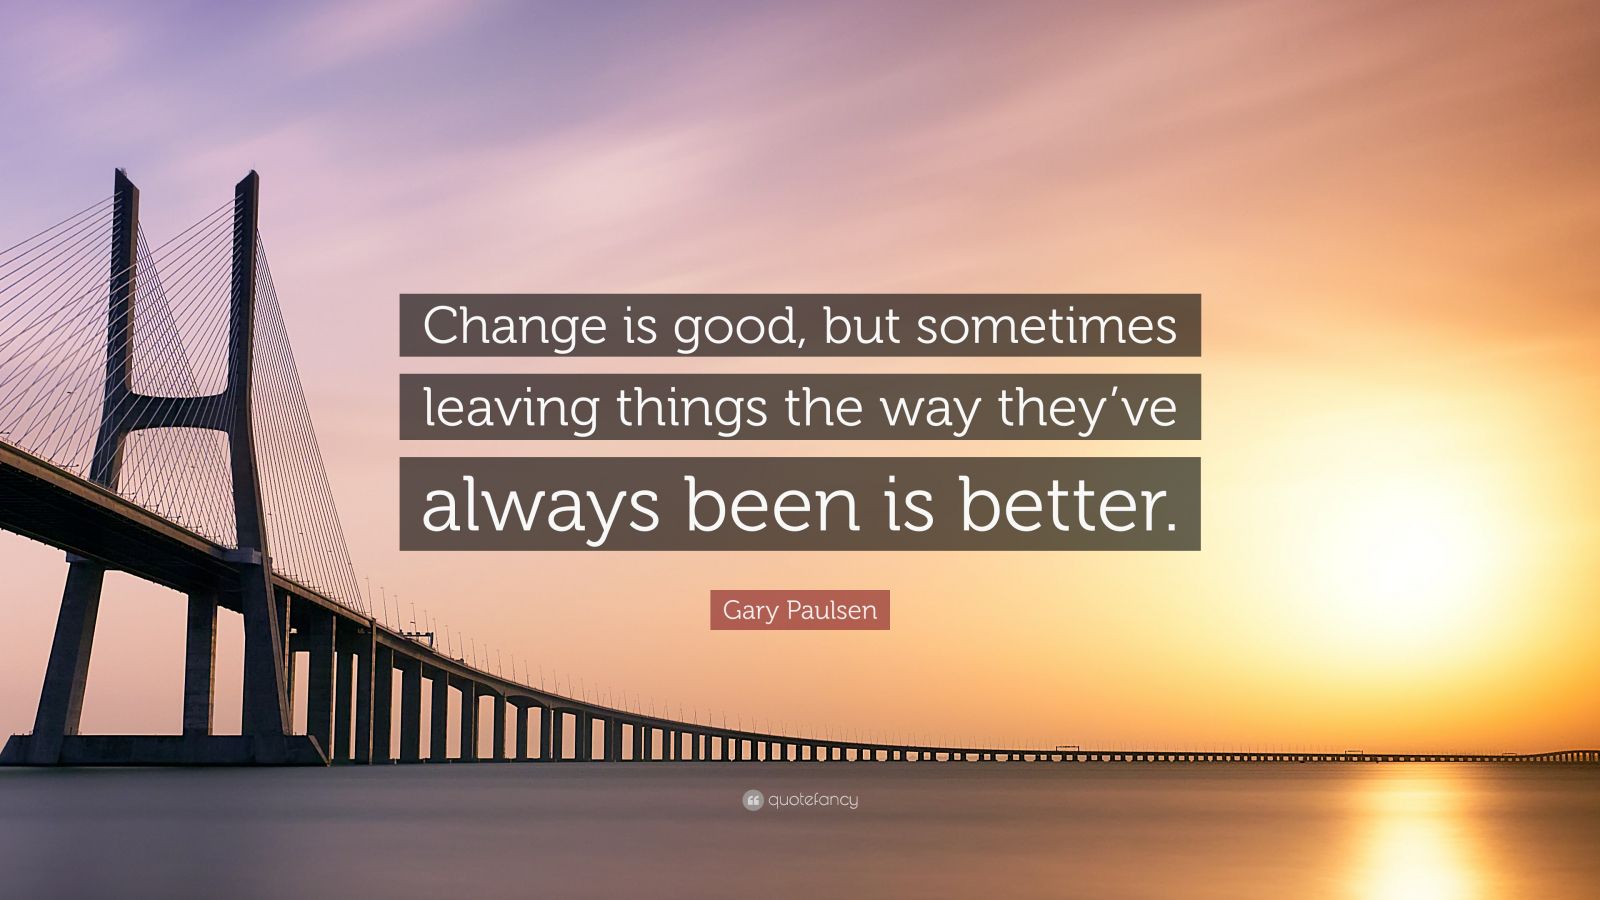 Gary Paulsen Quote: “Change is good, but sometimes leaving things the ...